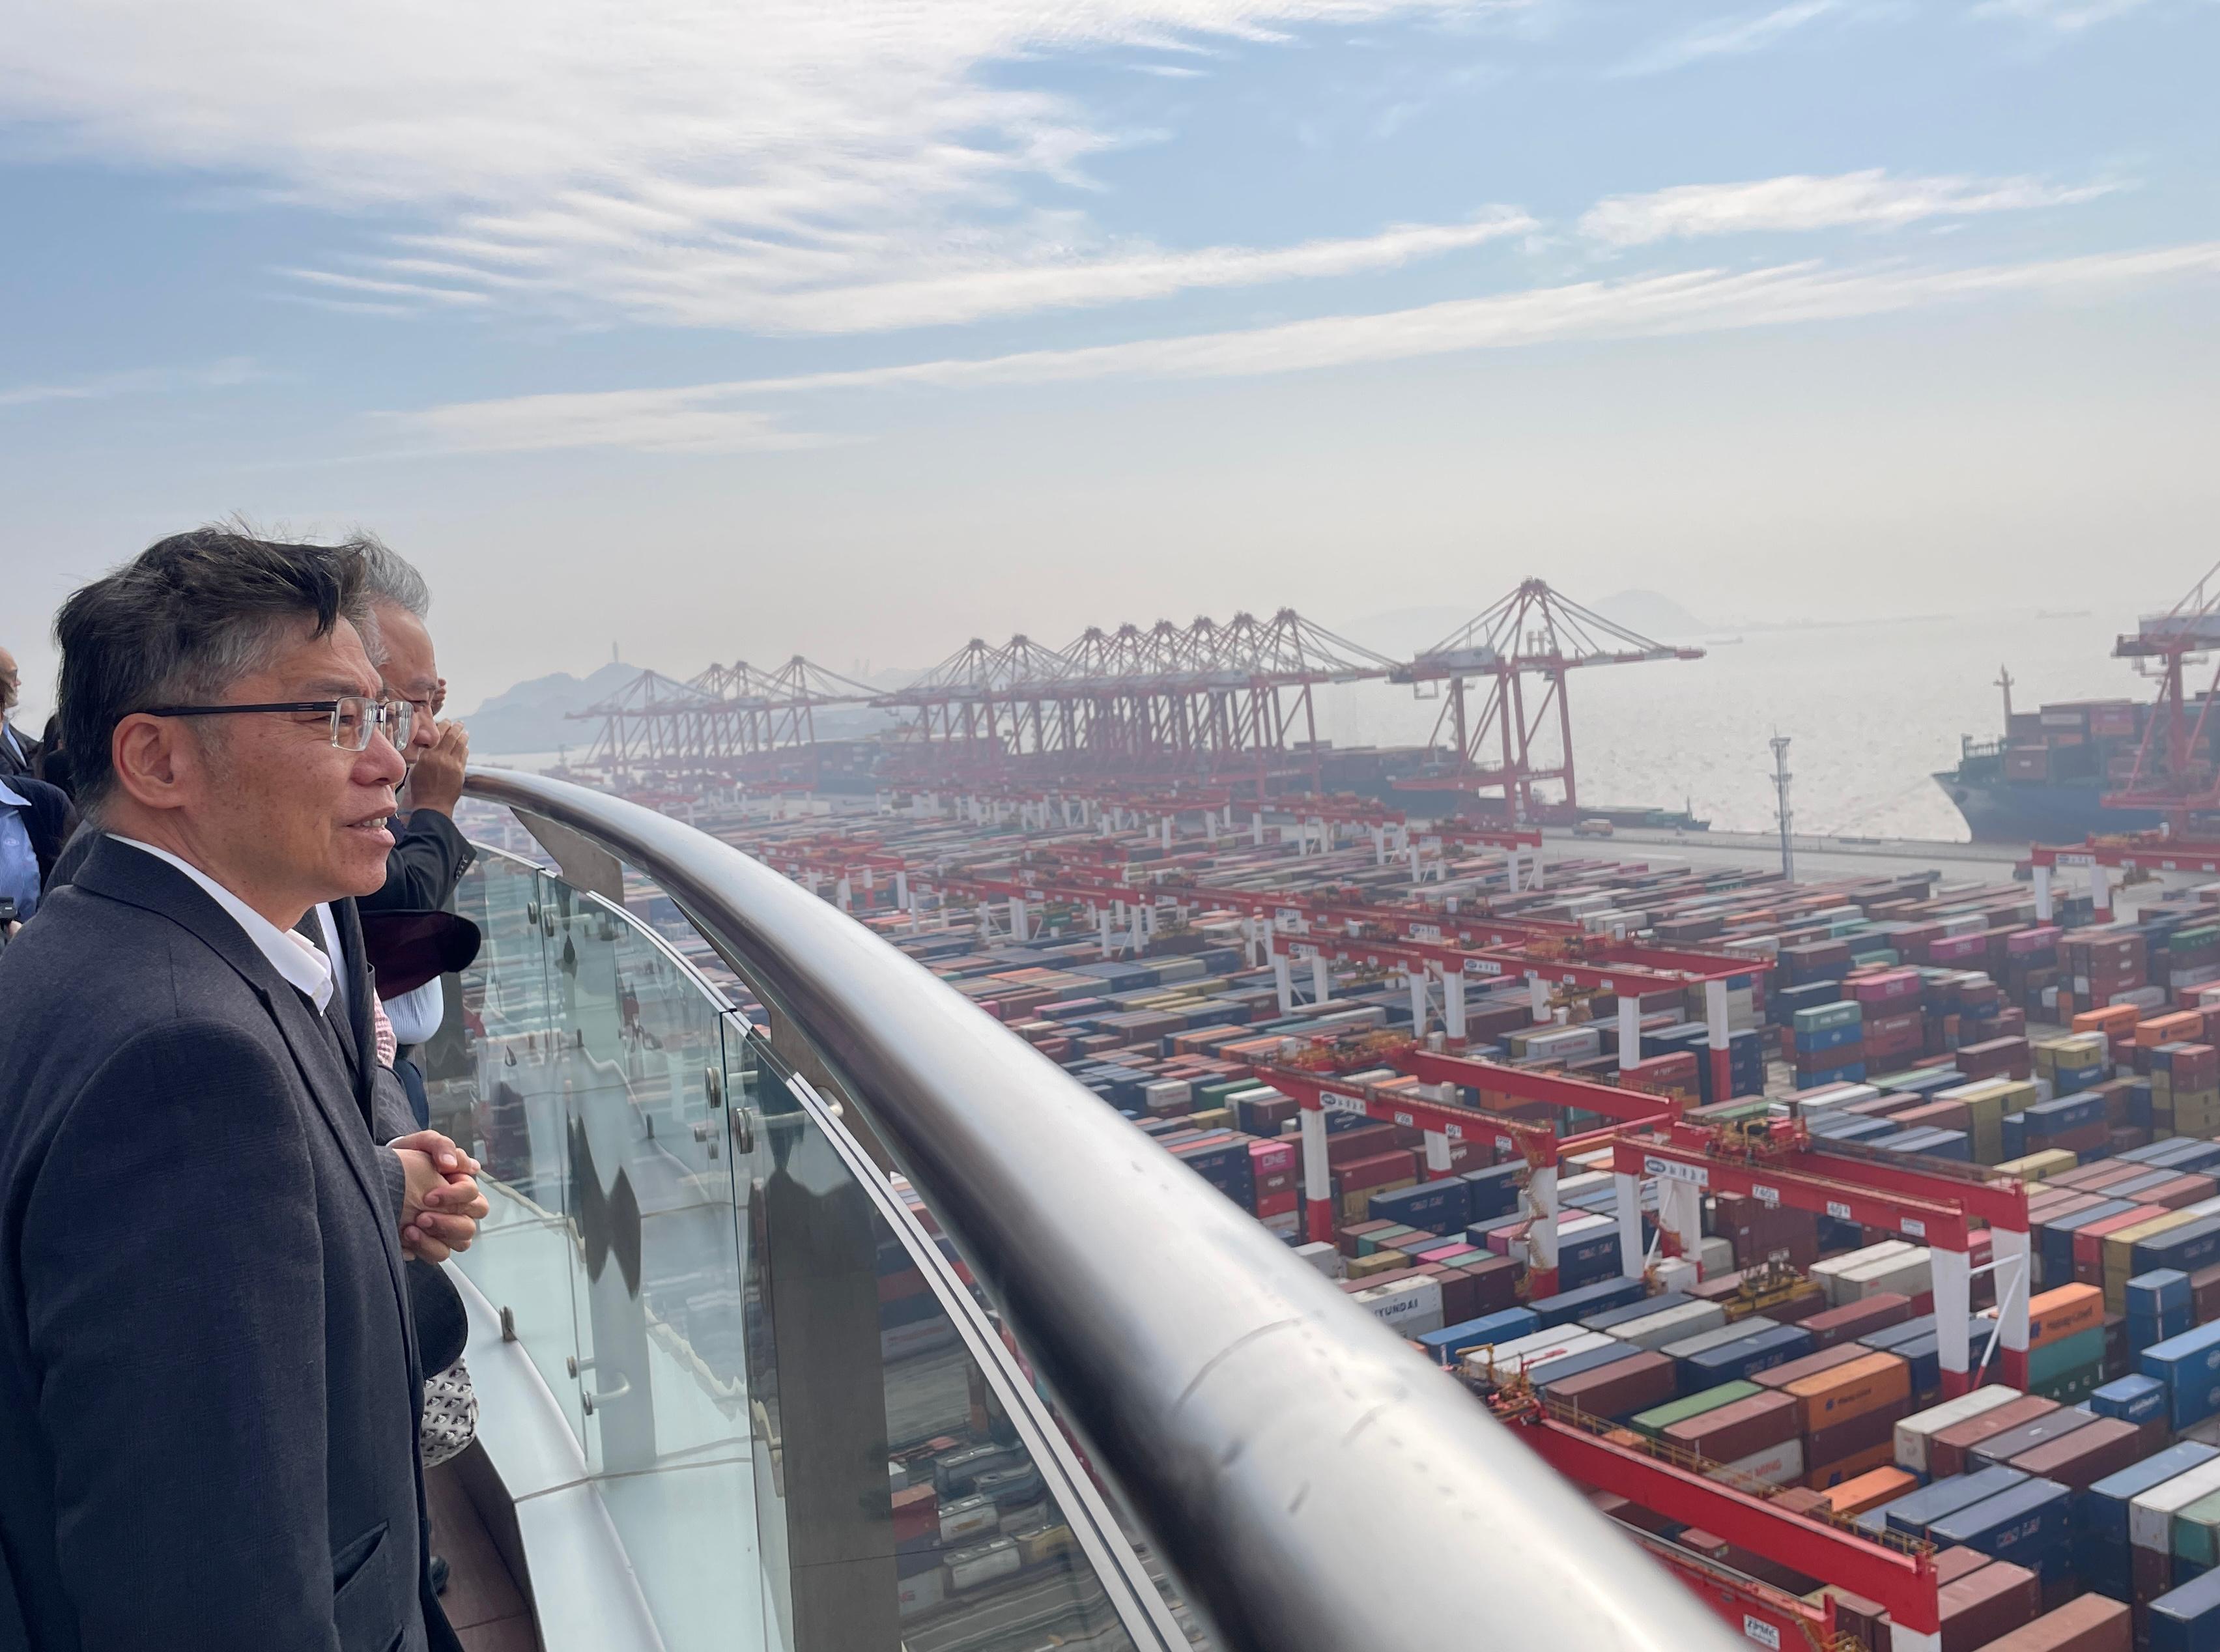 The Secretary for Transport and Logistics, Mr Lam Sai-hung (first left), leads members of the Hong Kong Maritime and Port Board to visit the Yangshan Phase IV Automated Terminal in Shanghai today (December 6) to understand more about its operation.